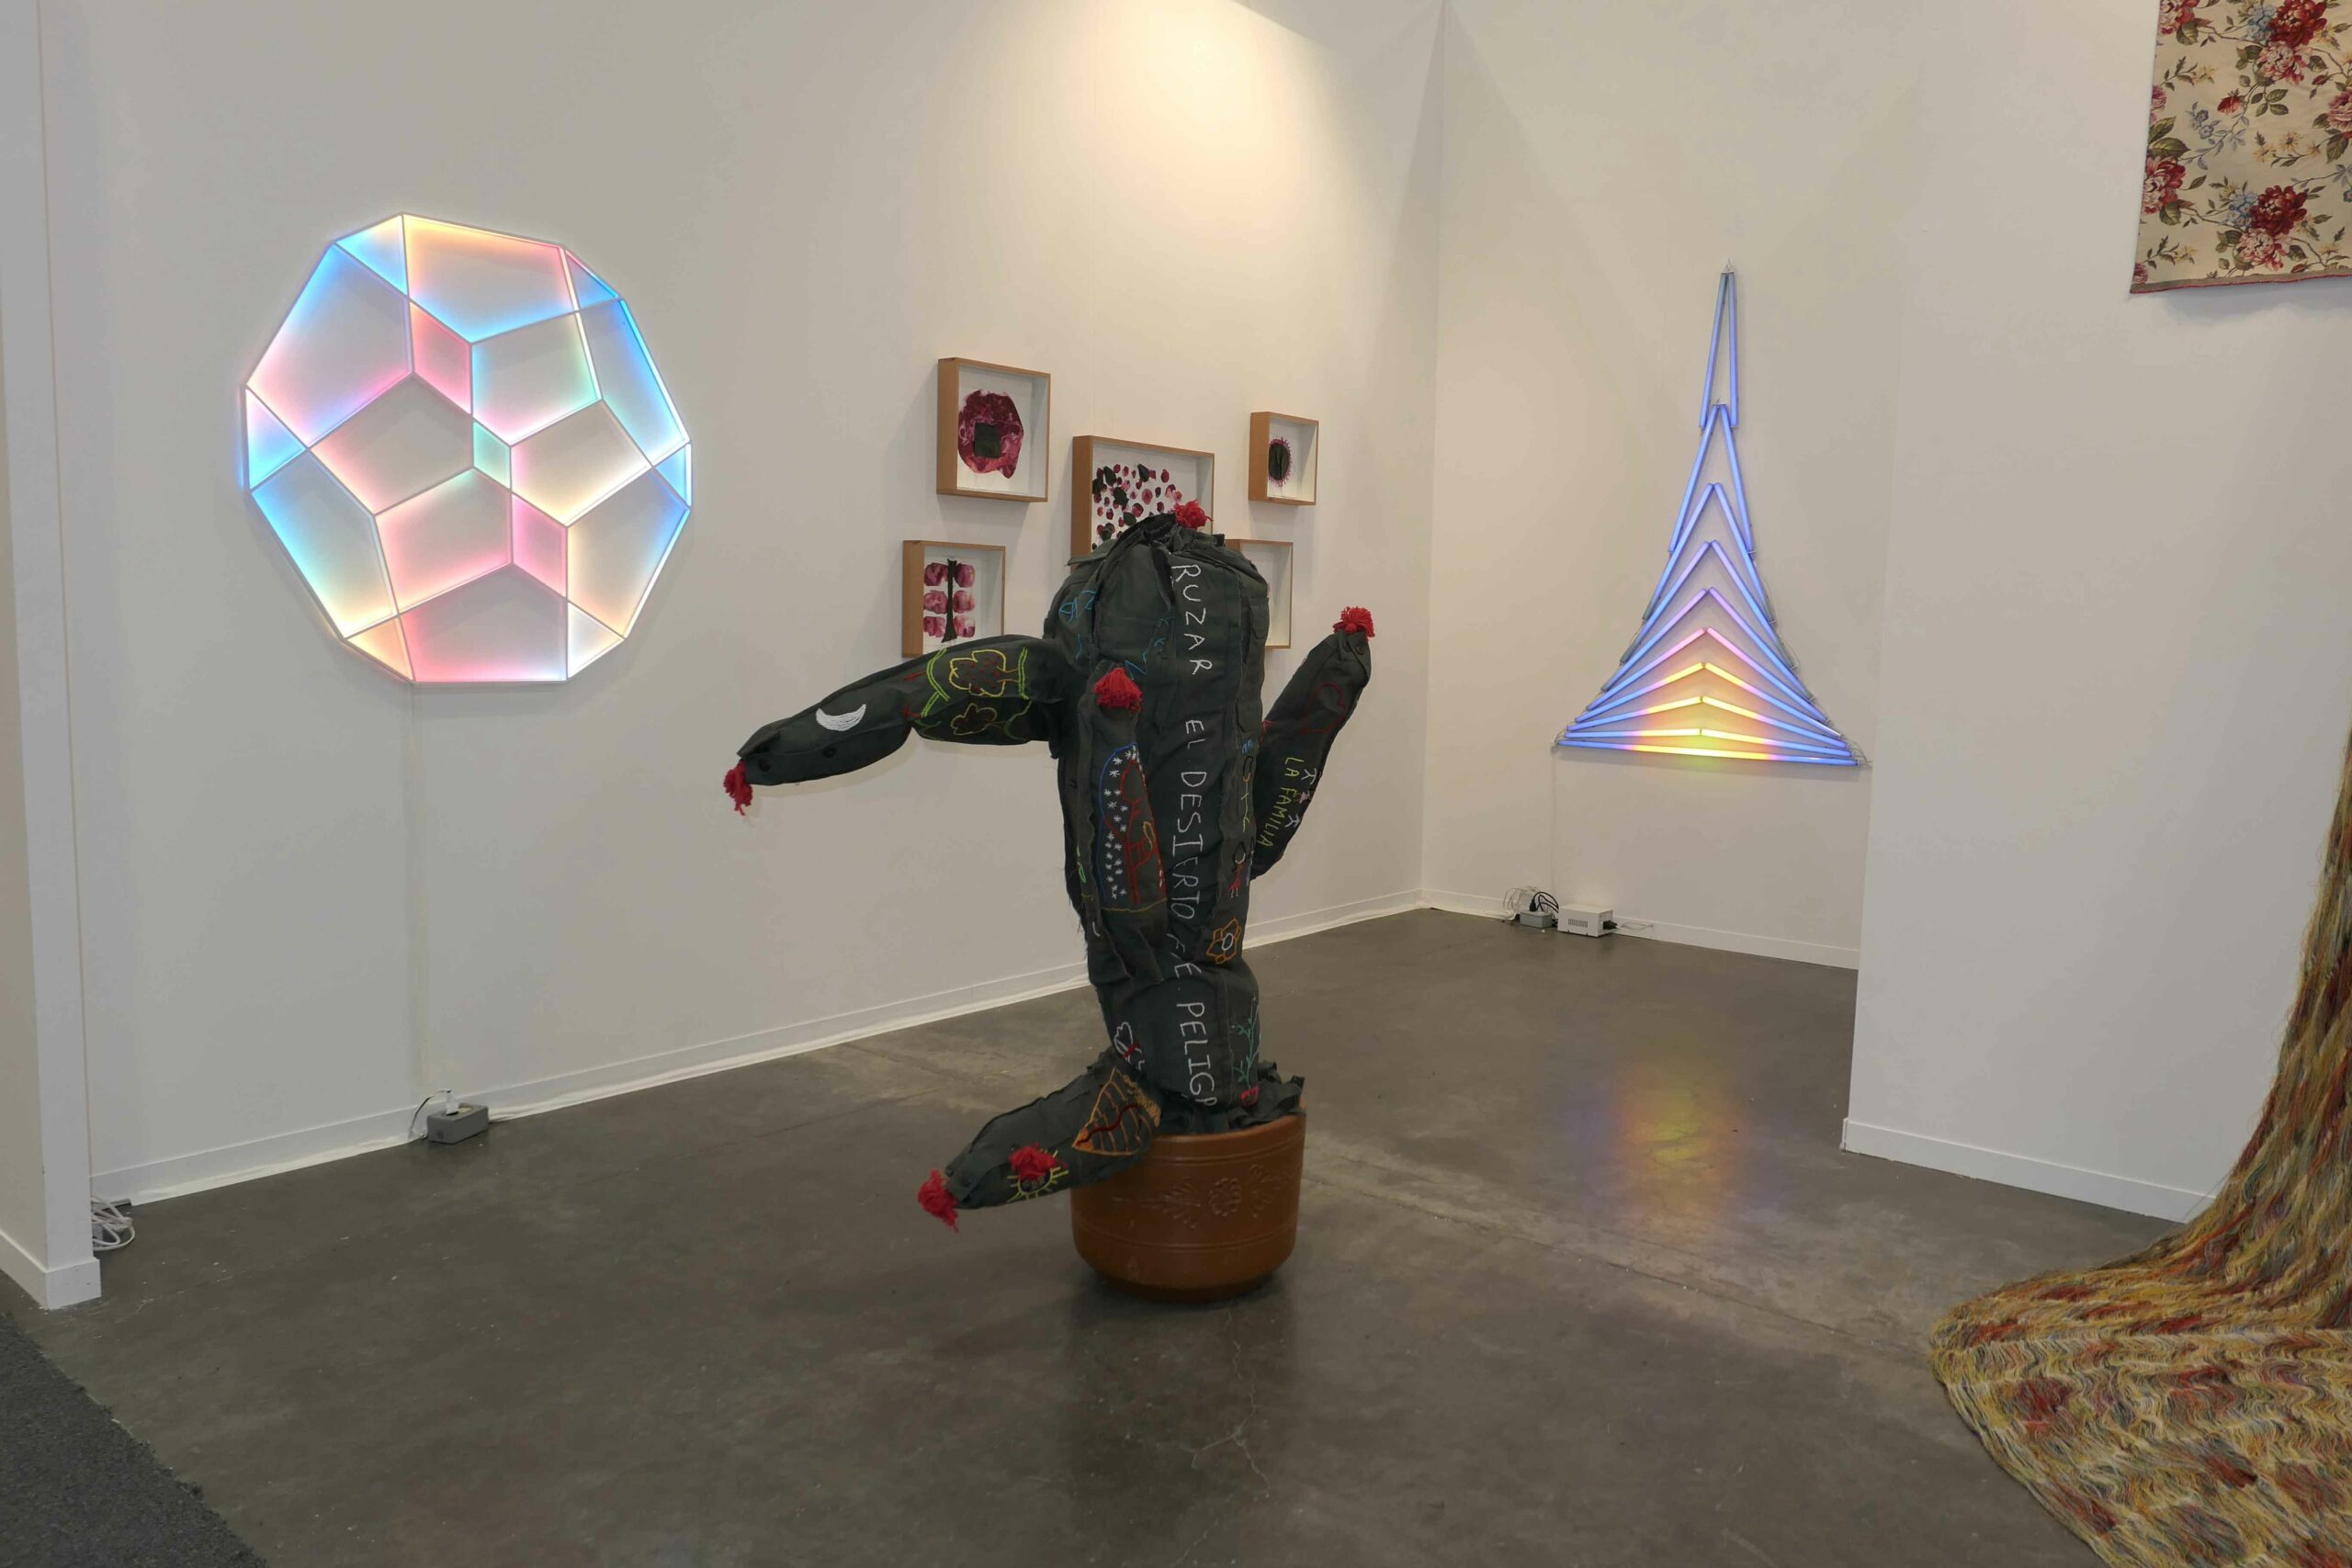 LED light sculptures and a cactus sculpture made from border patrol uniforms fill a booth at an art fair.